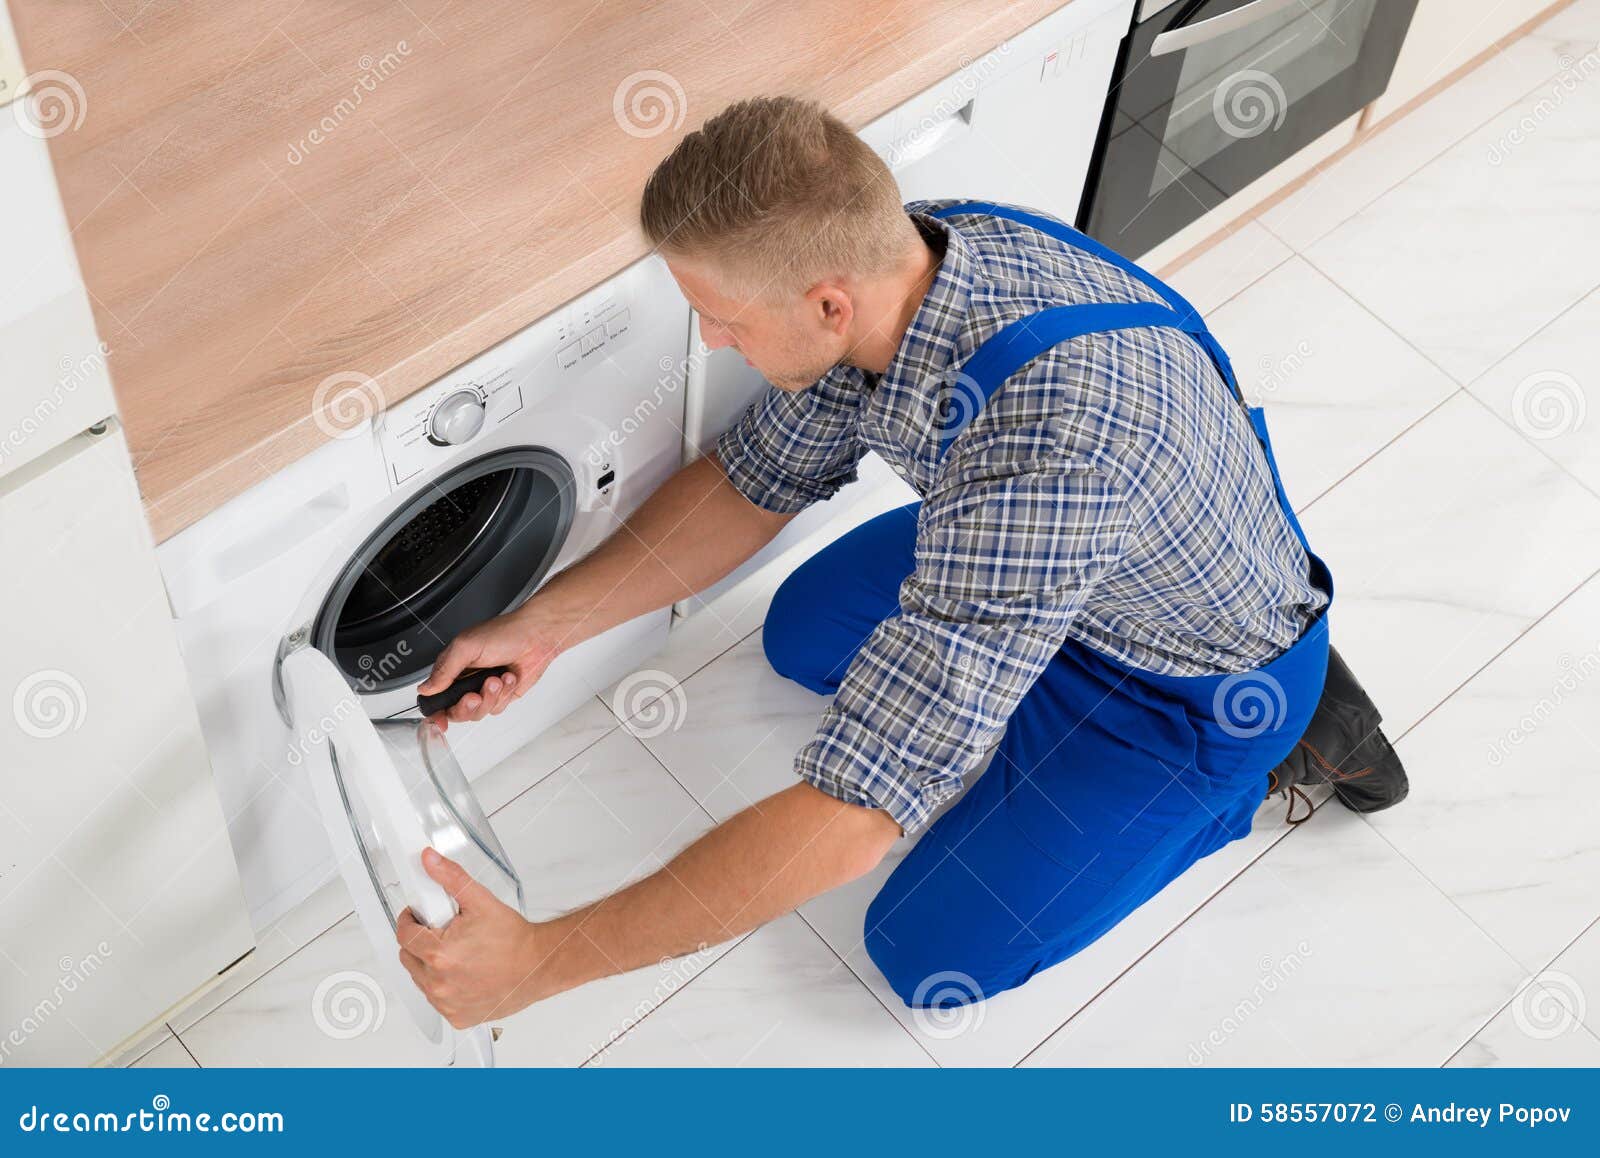 worker in overall fixing washer